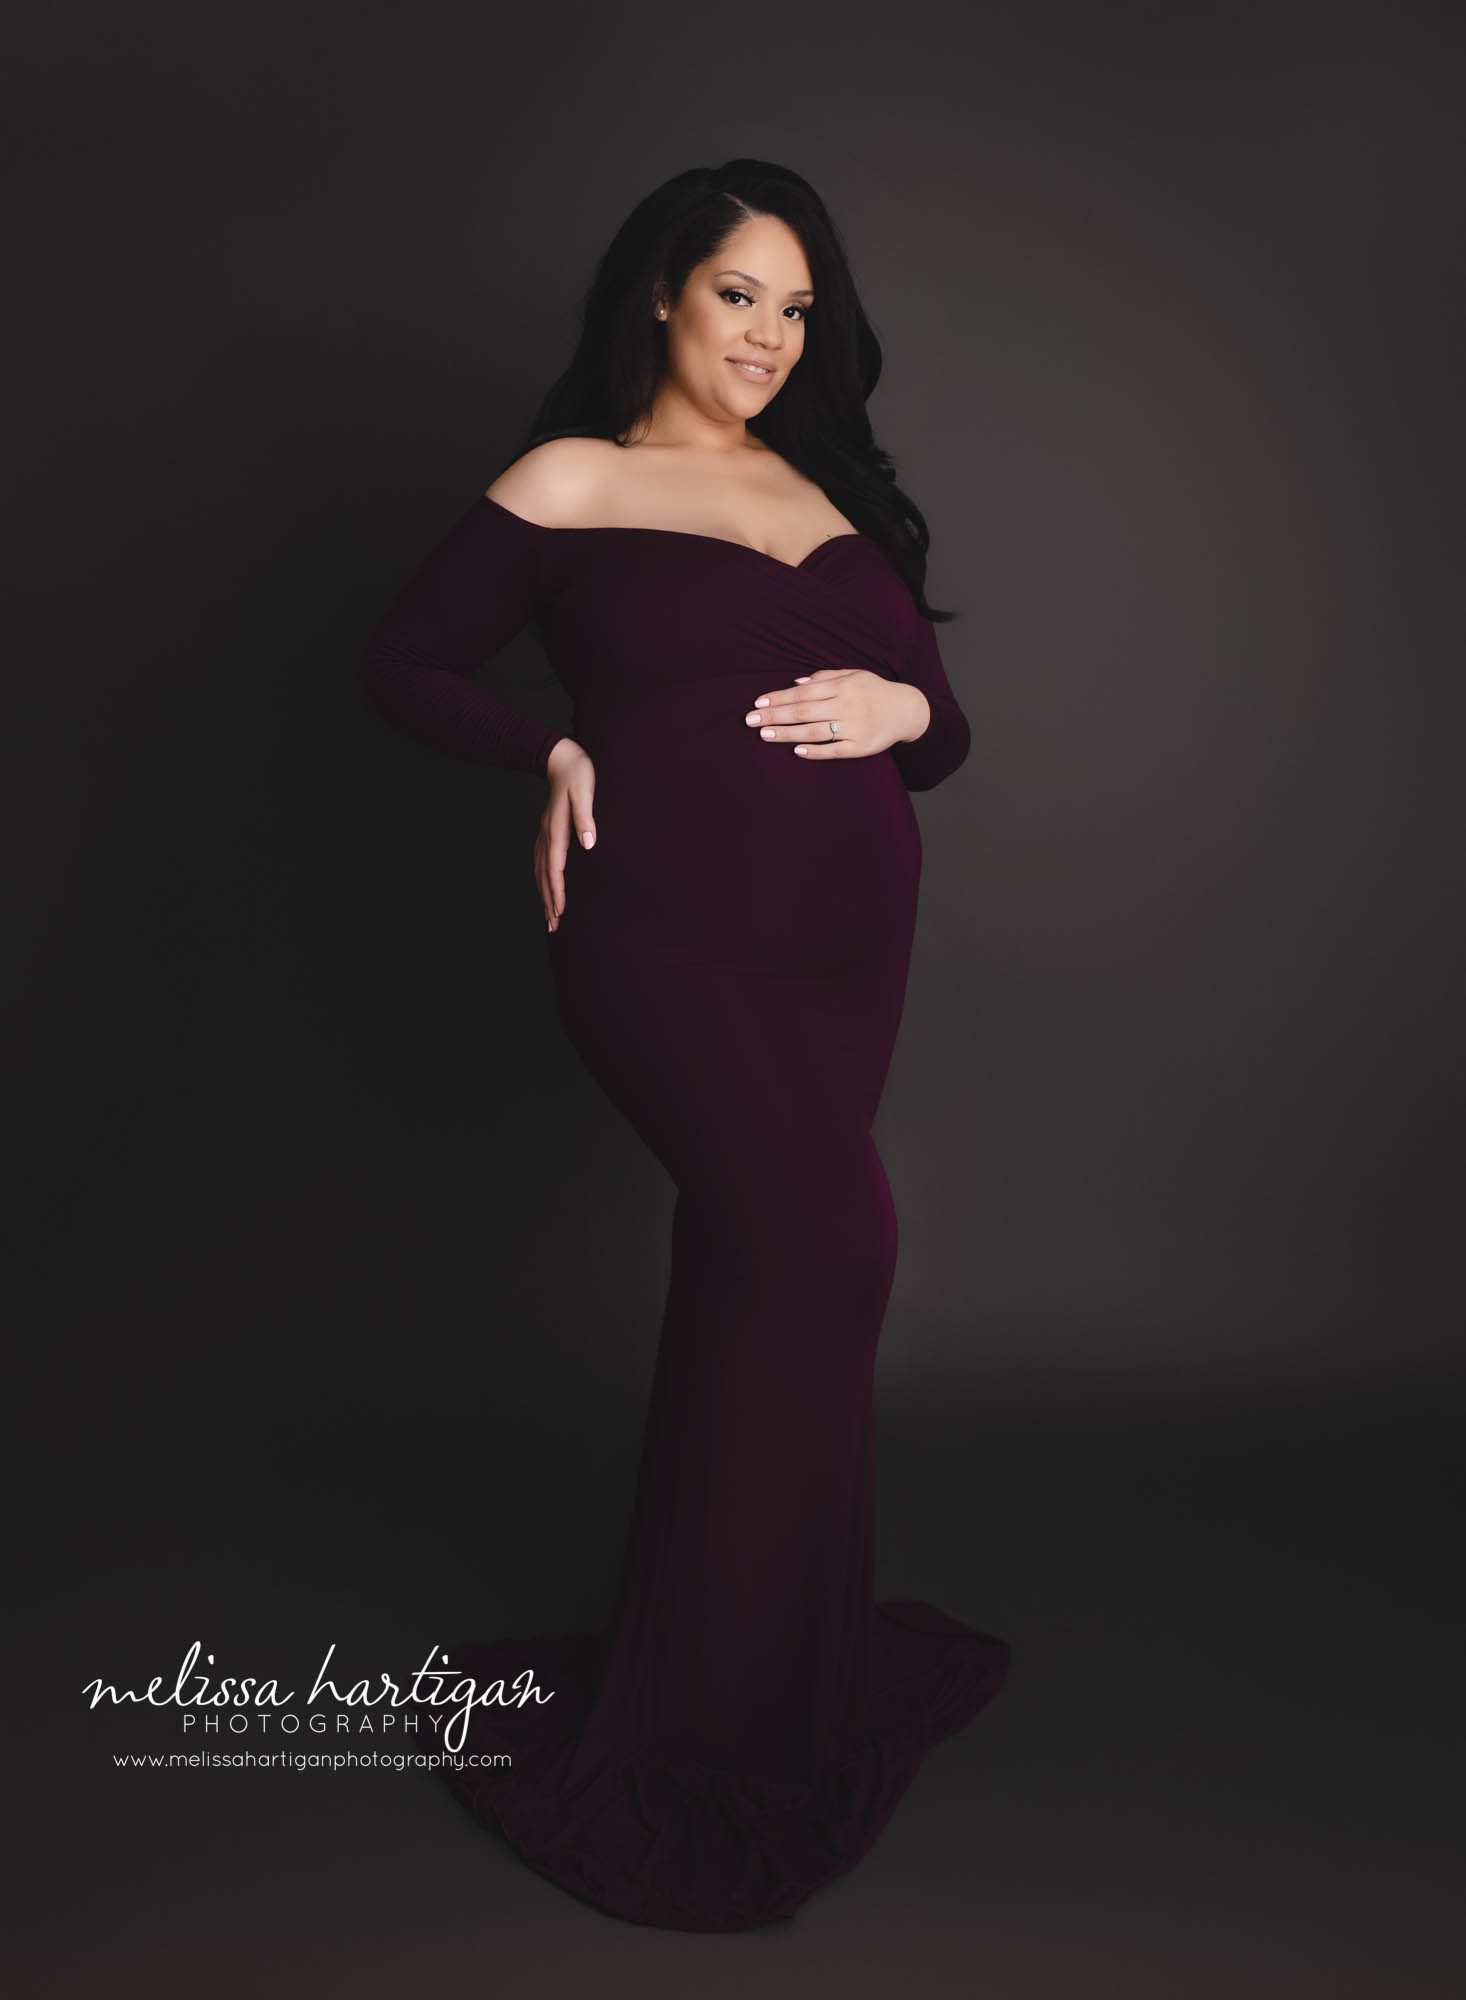 mom holding side and baby bump standing maternity photography pose eggplant purple maternity dress